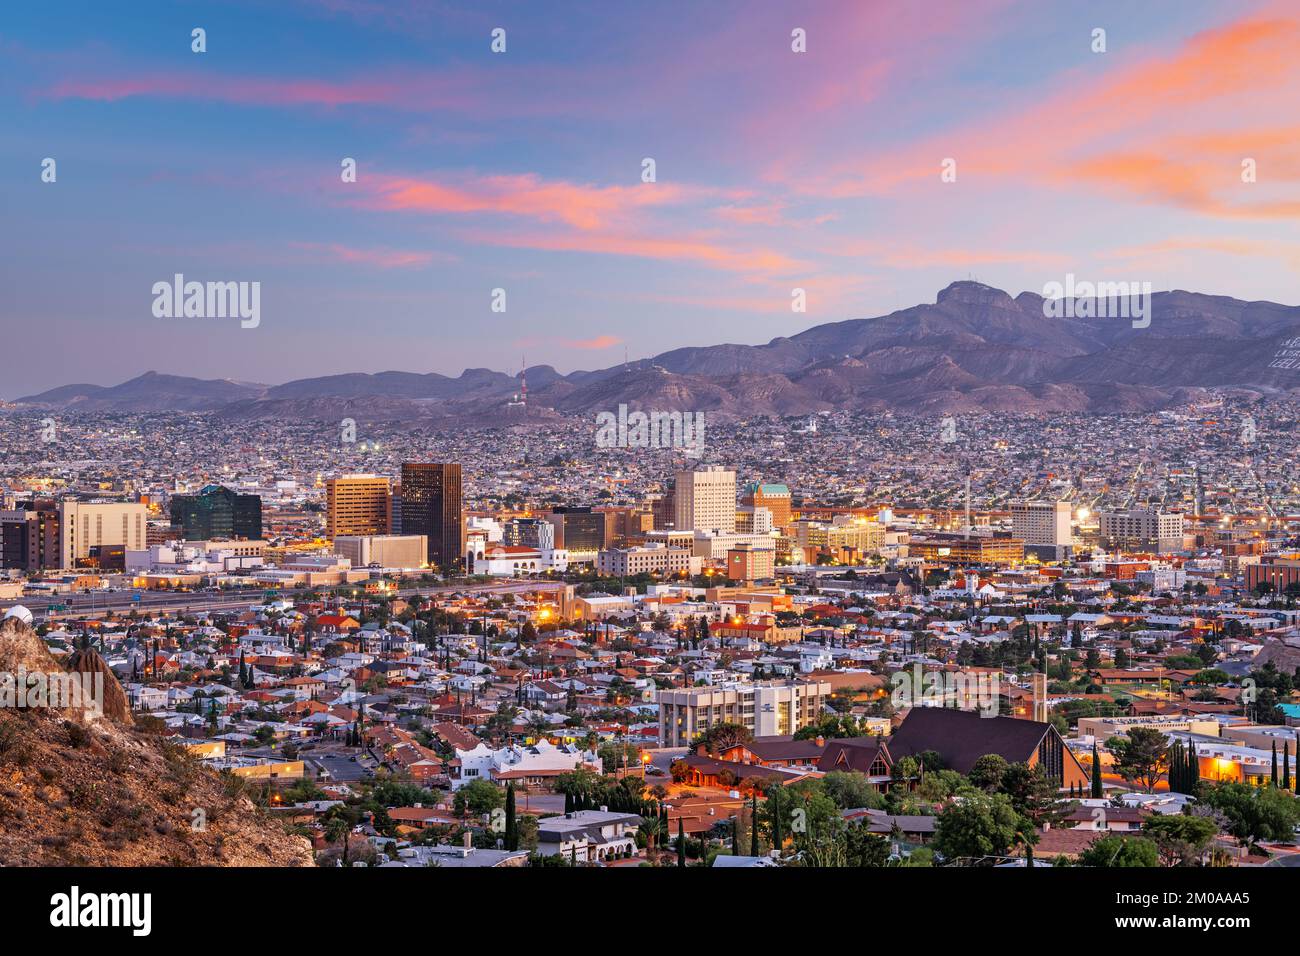 El Paso, Texas, USA  downtown city skyline at dusk with Juarez, Mexico in the distance. Stock Photo